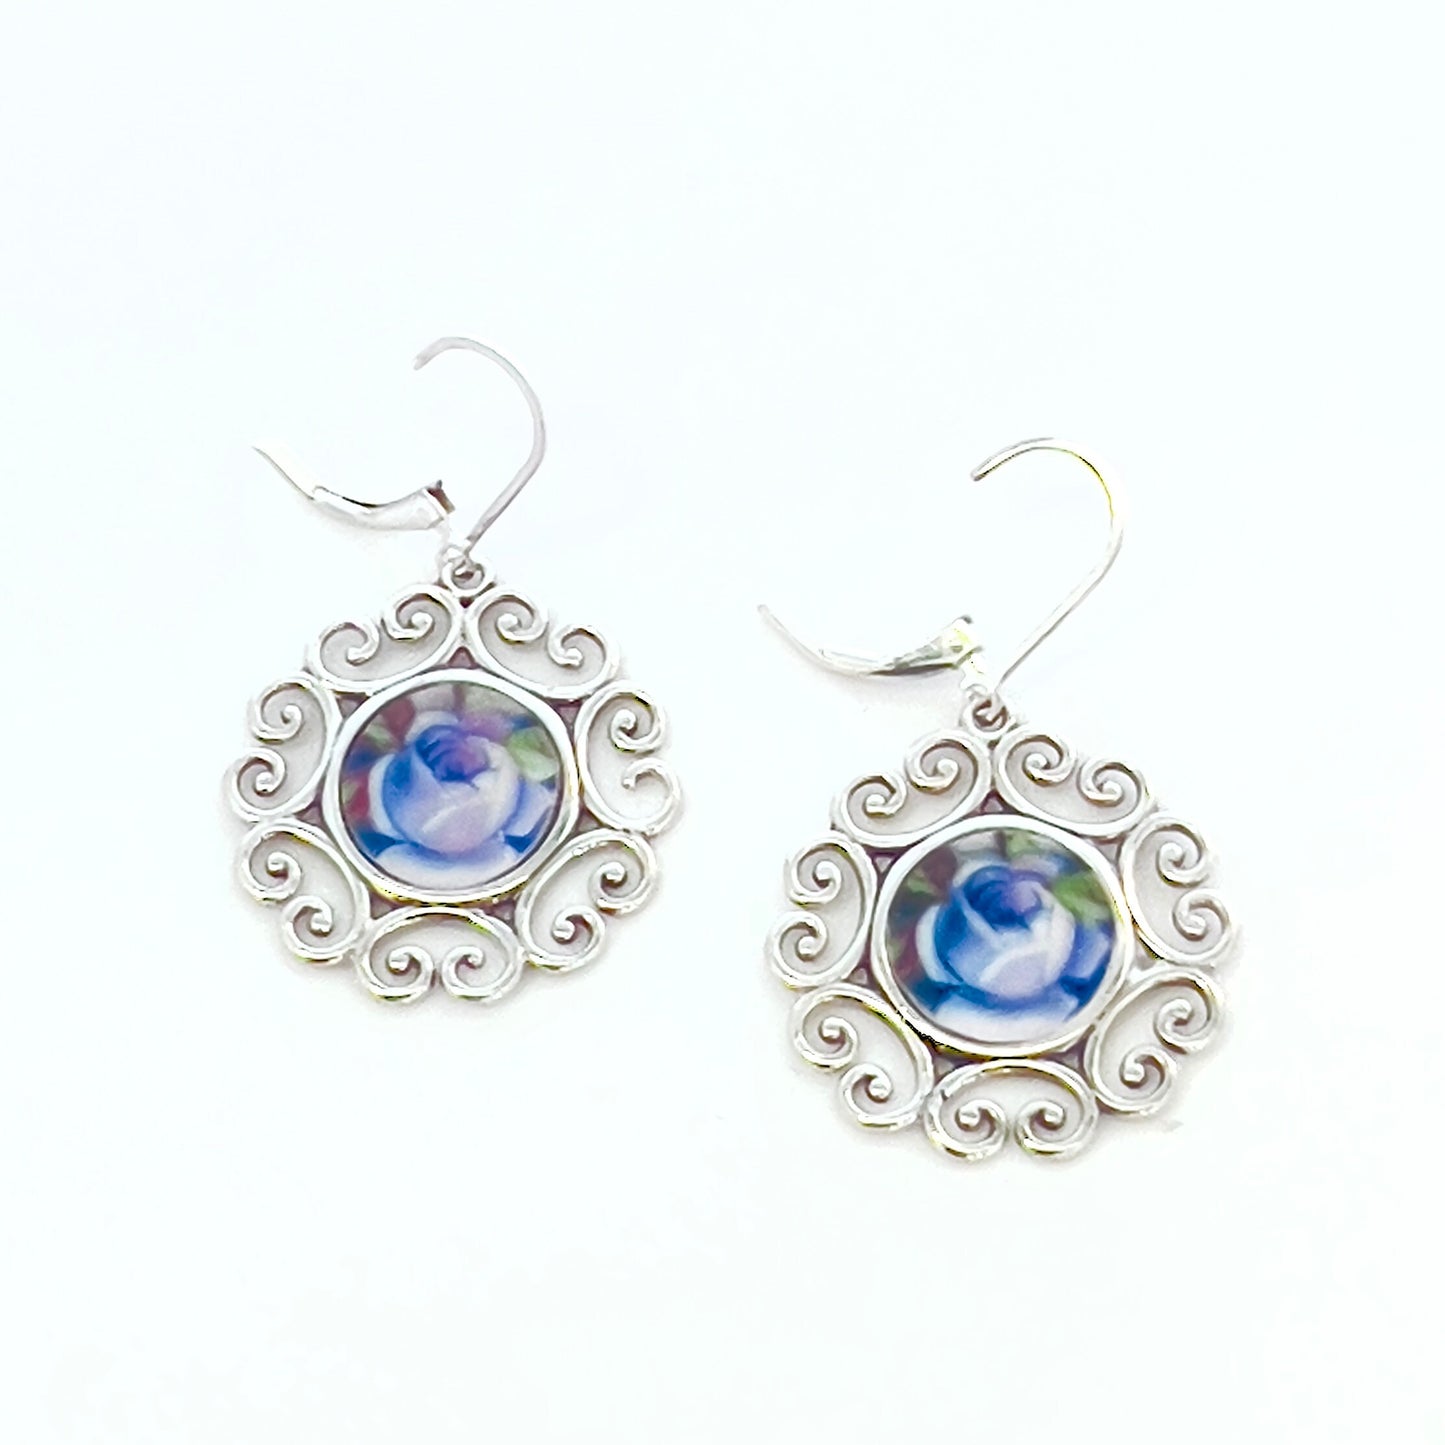 Royal Albert Moonlight Rose China, Broken China Jewelry Earrings, Blue Rose Unique Cottagecore Jewelry, Graduation Gifts